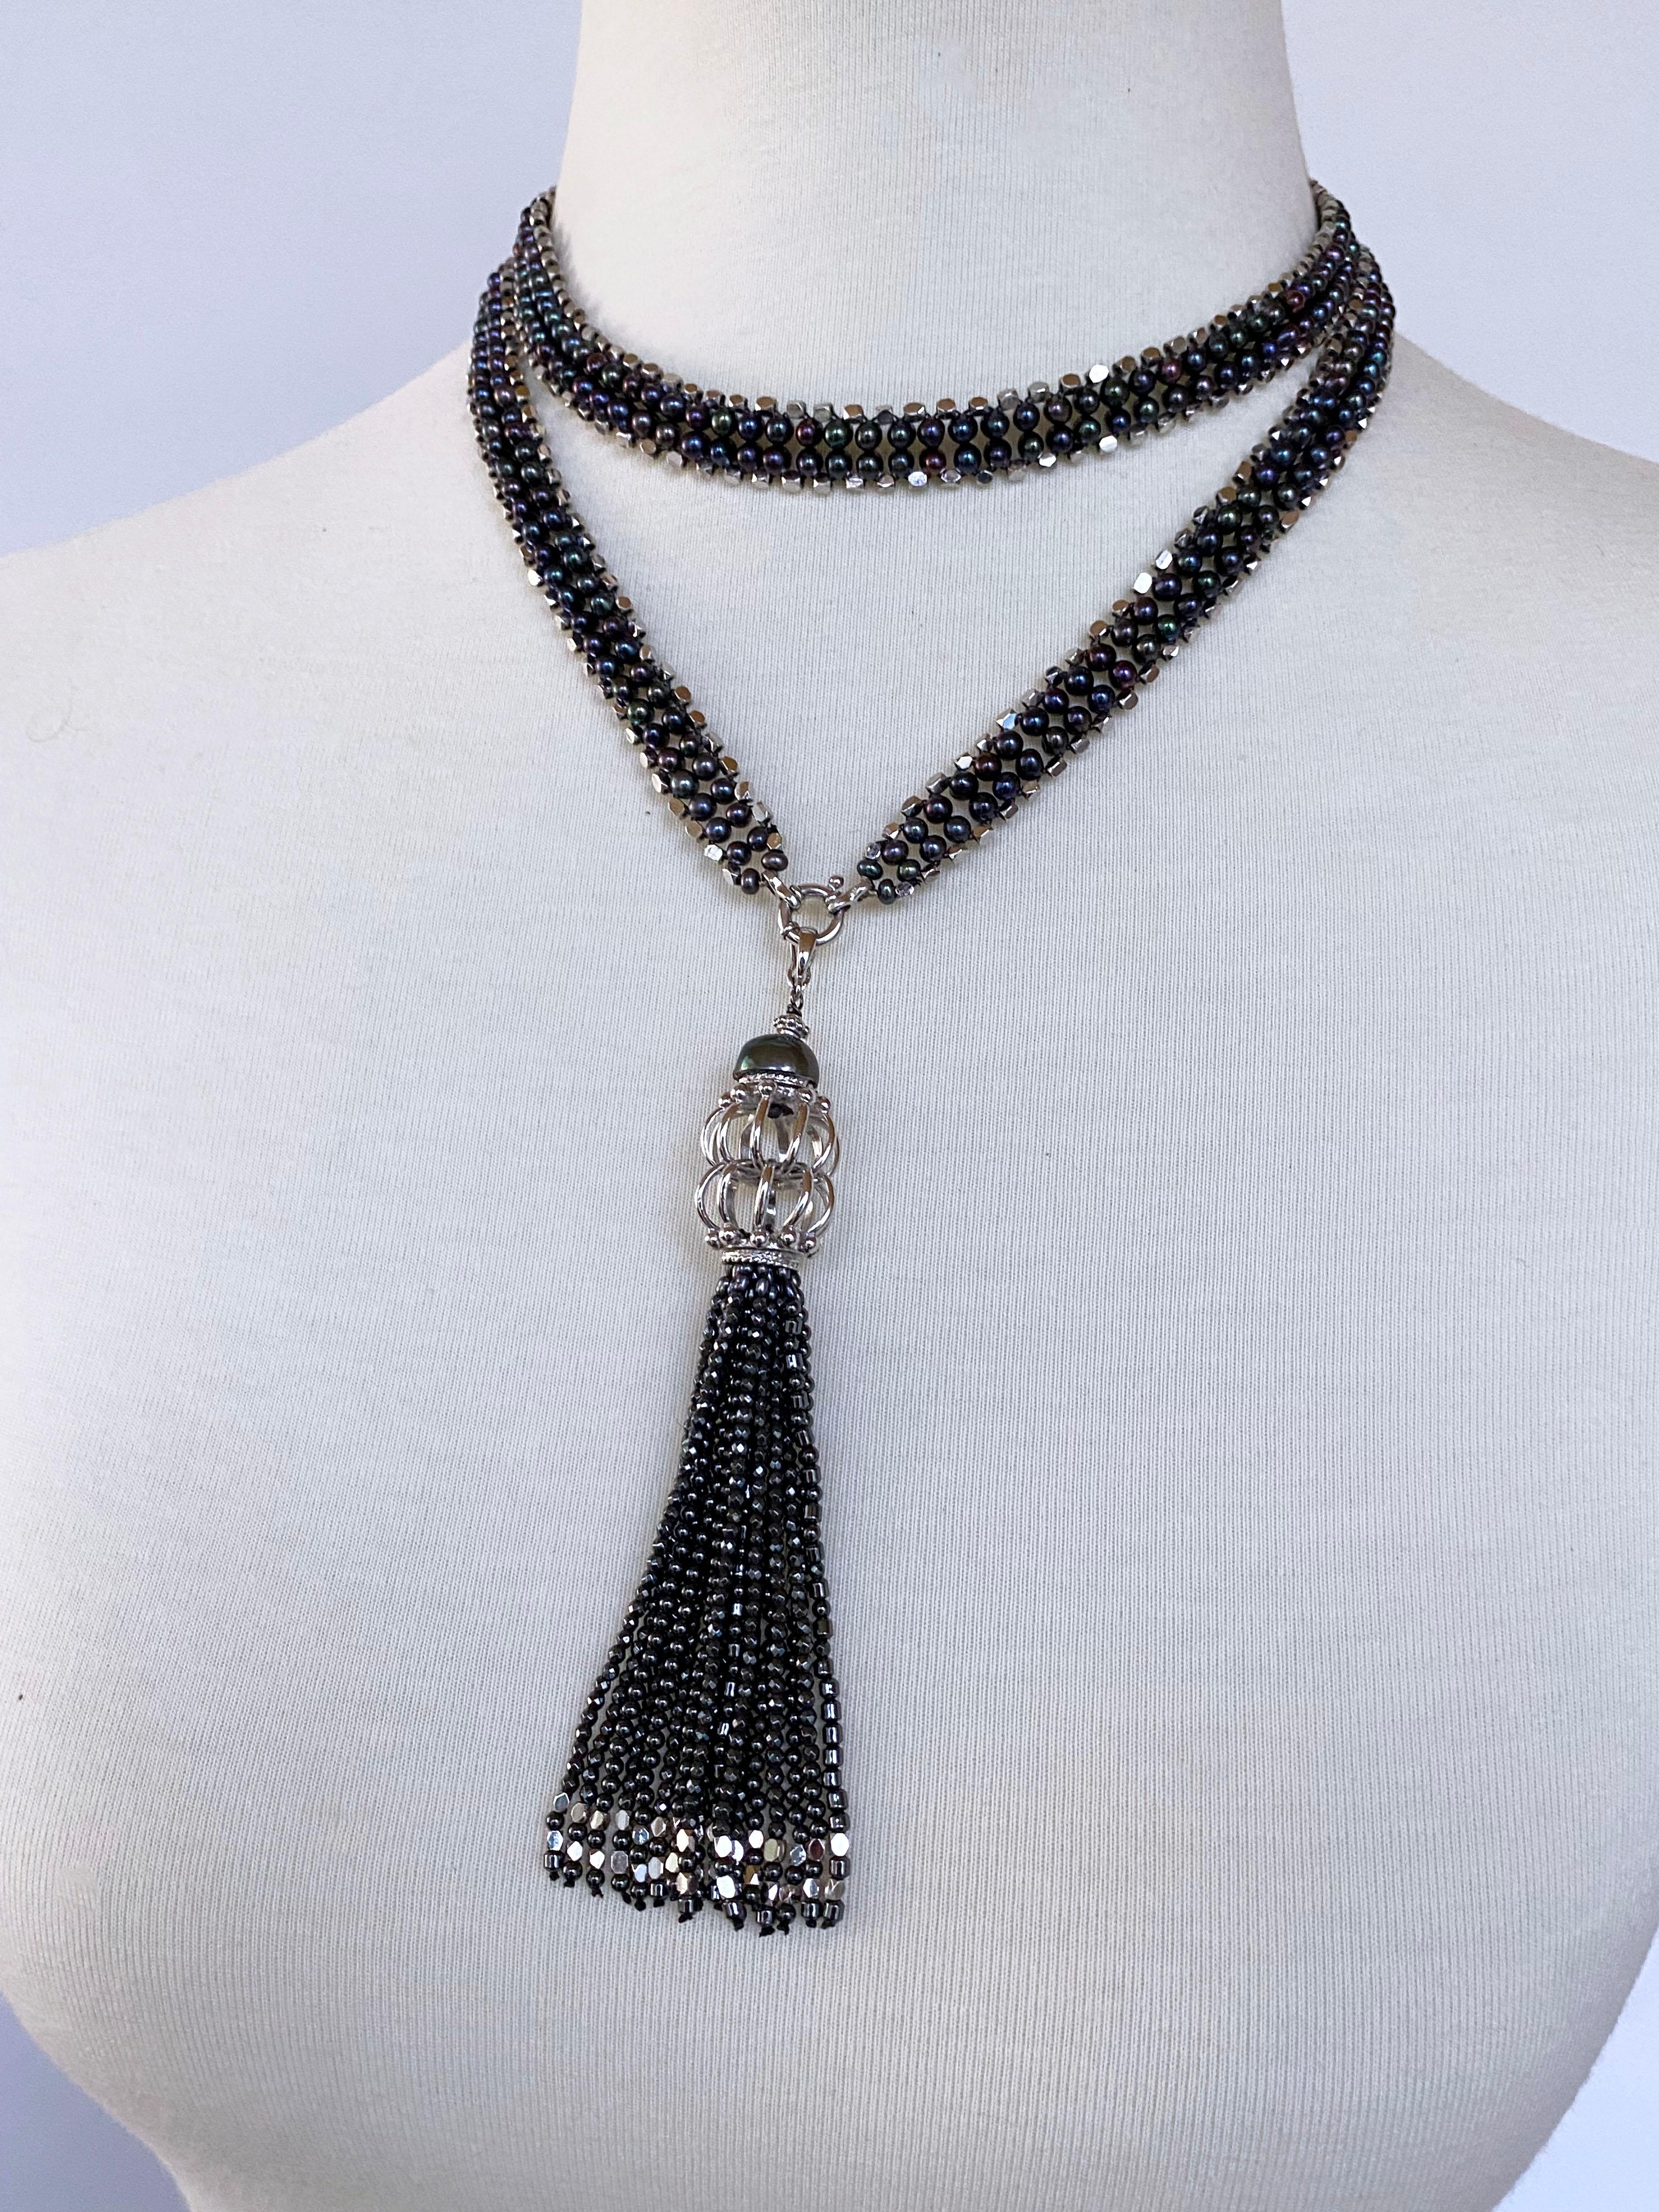 Amazing unisex piece by Marina J. This double stranded Sautoir is made of all Black Pearls and geometric faceted Silver Beads woven together into a double column pattern. The Black Pearls display a multicolor 